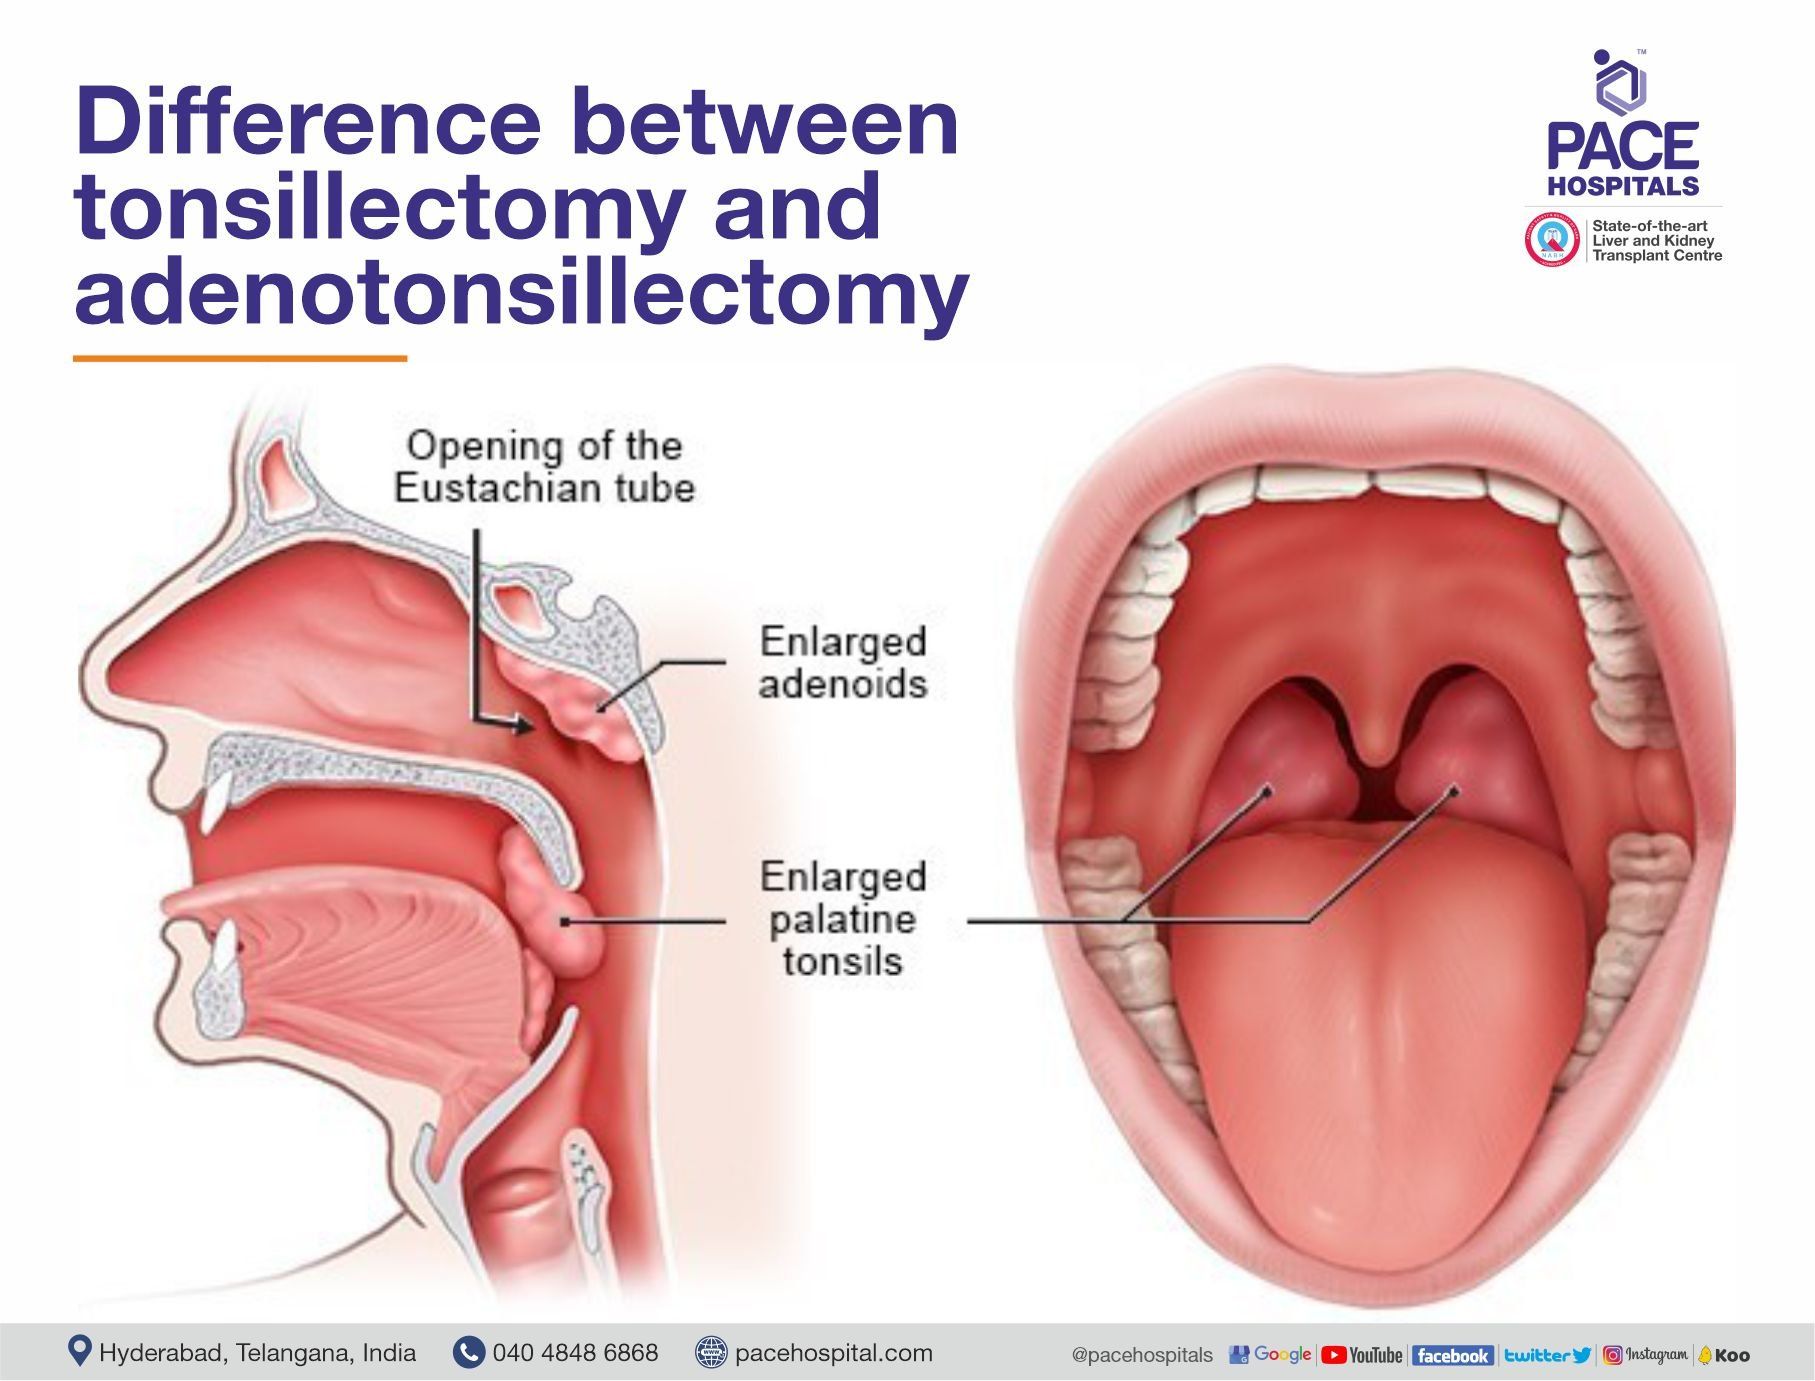 Difference between tonsillectomy and adenotonsillectomy | Pace Hospitals